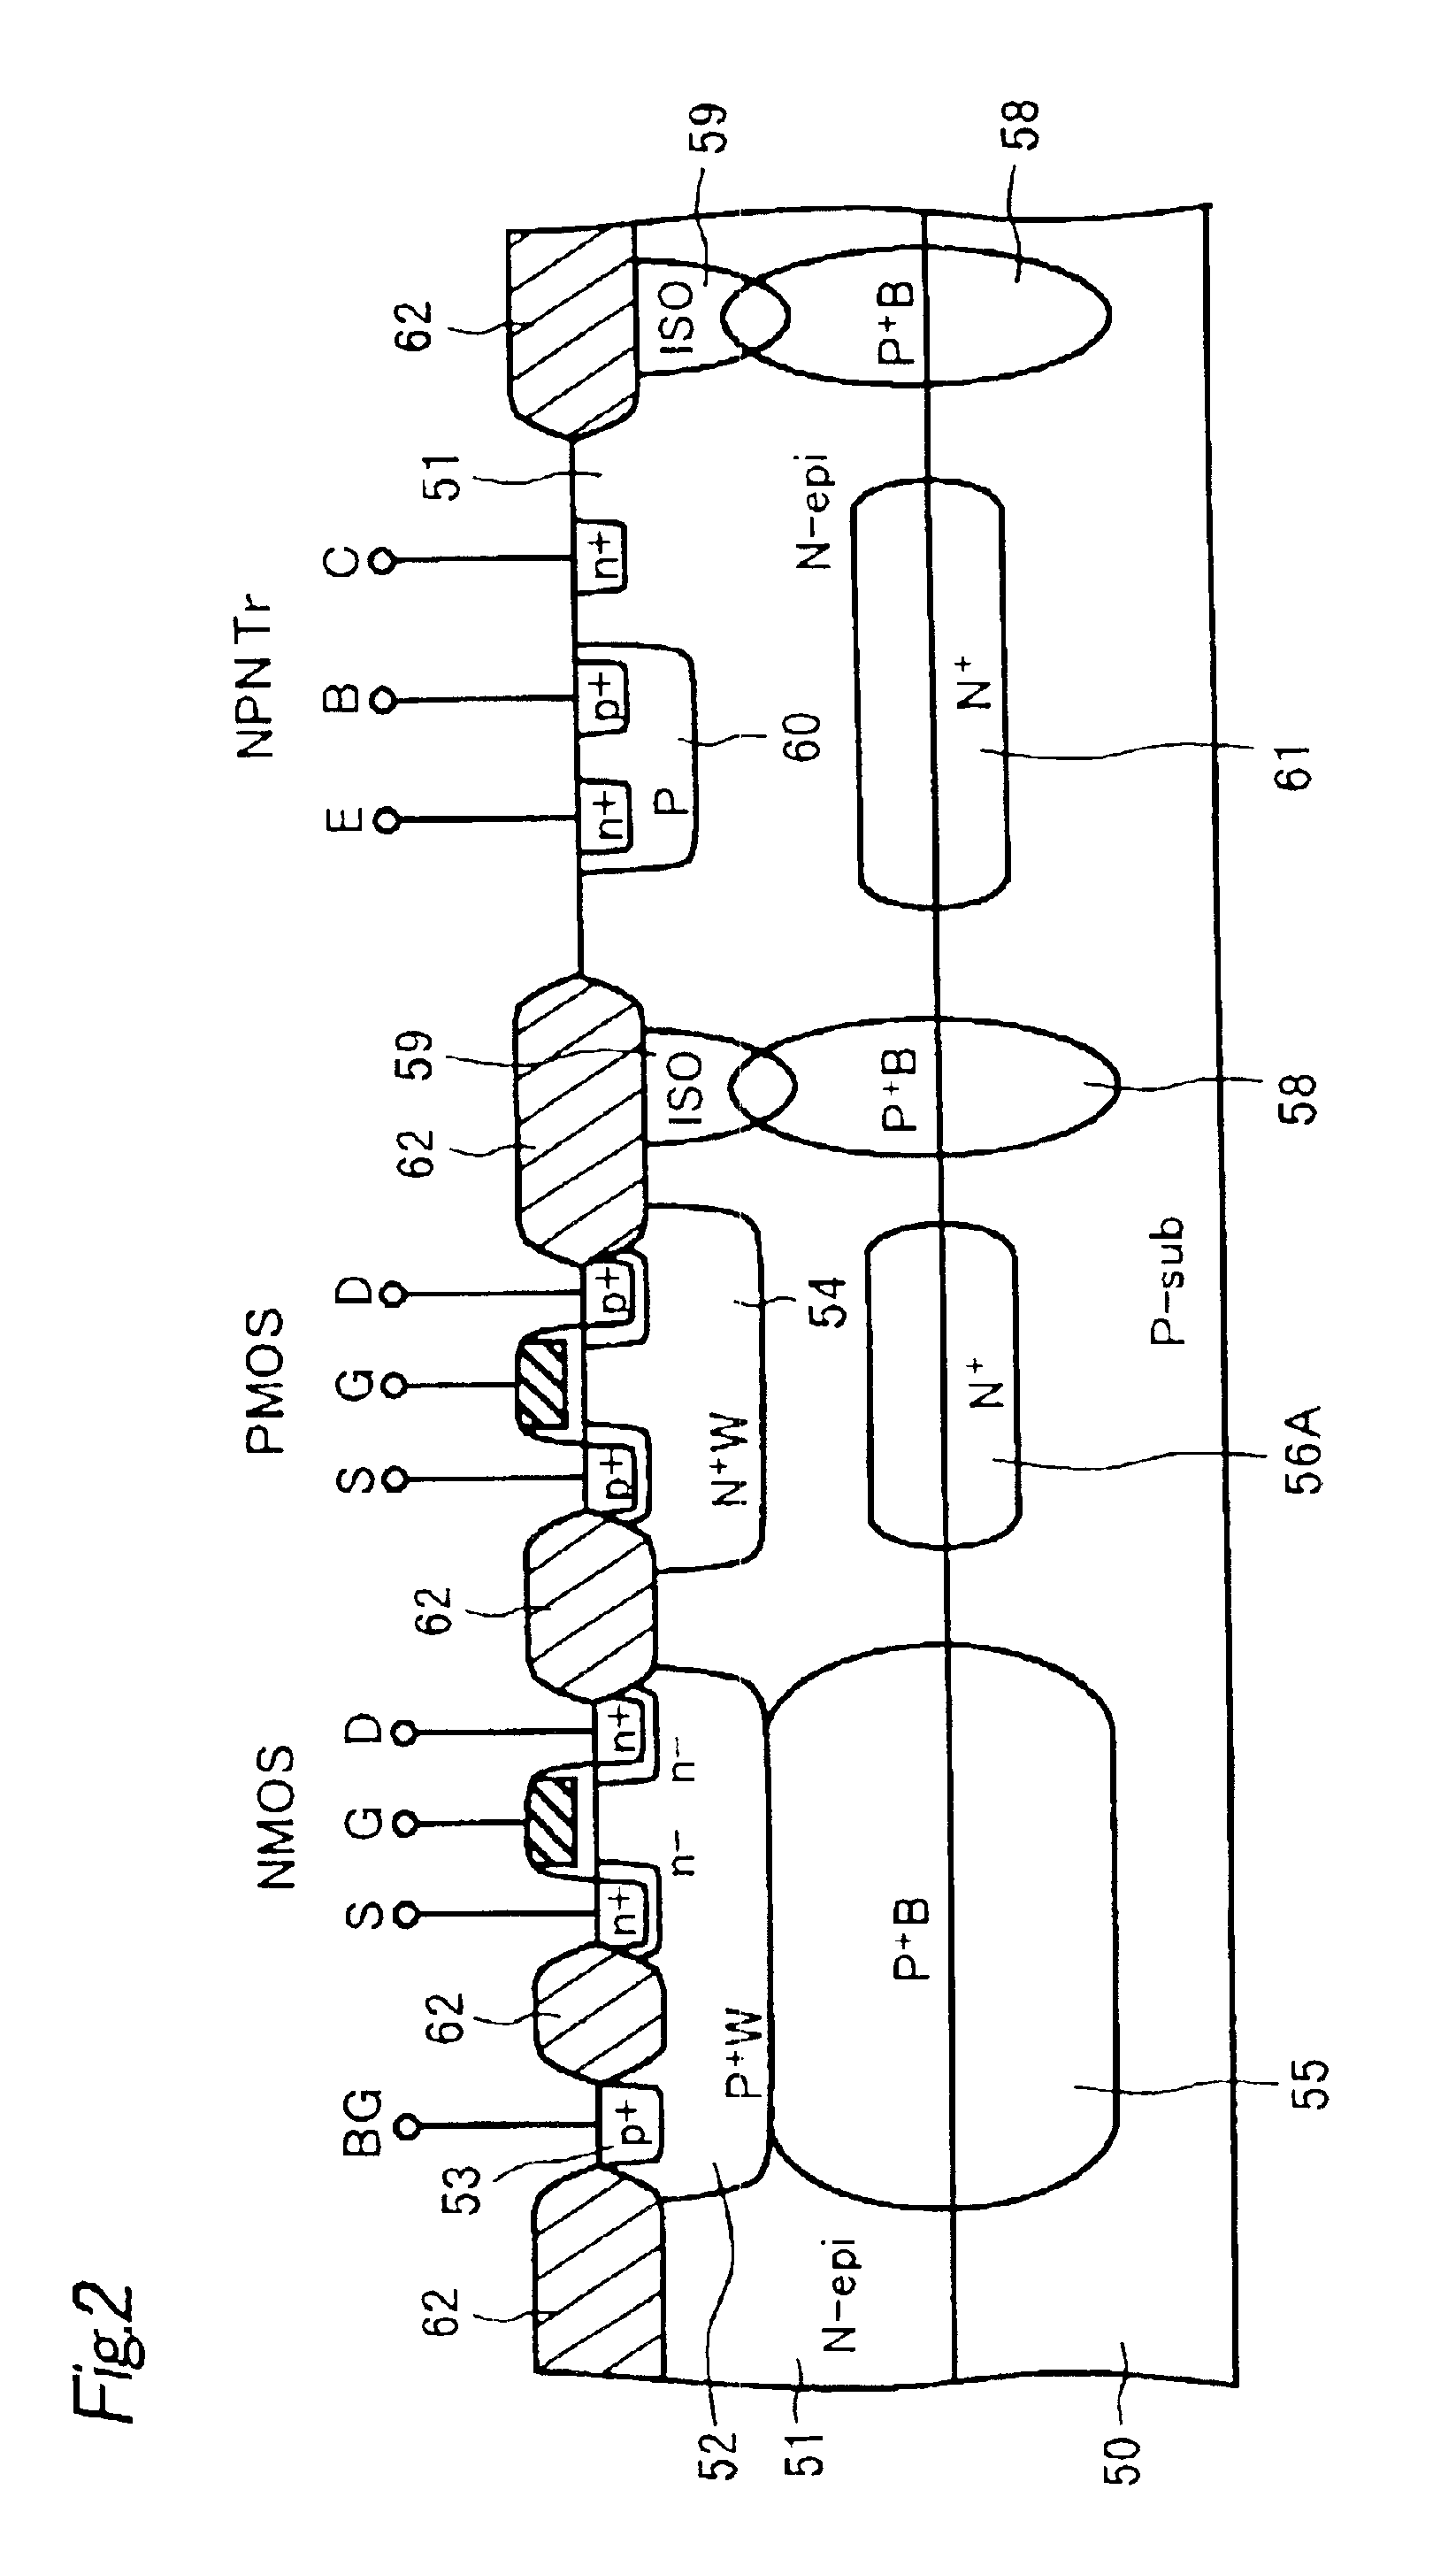 Charge pump device